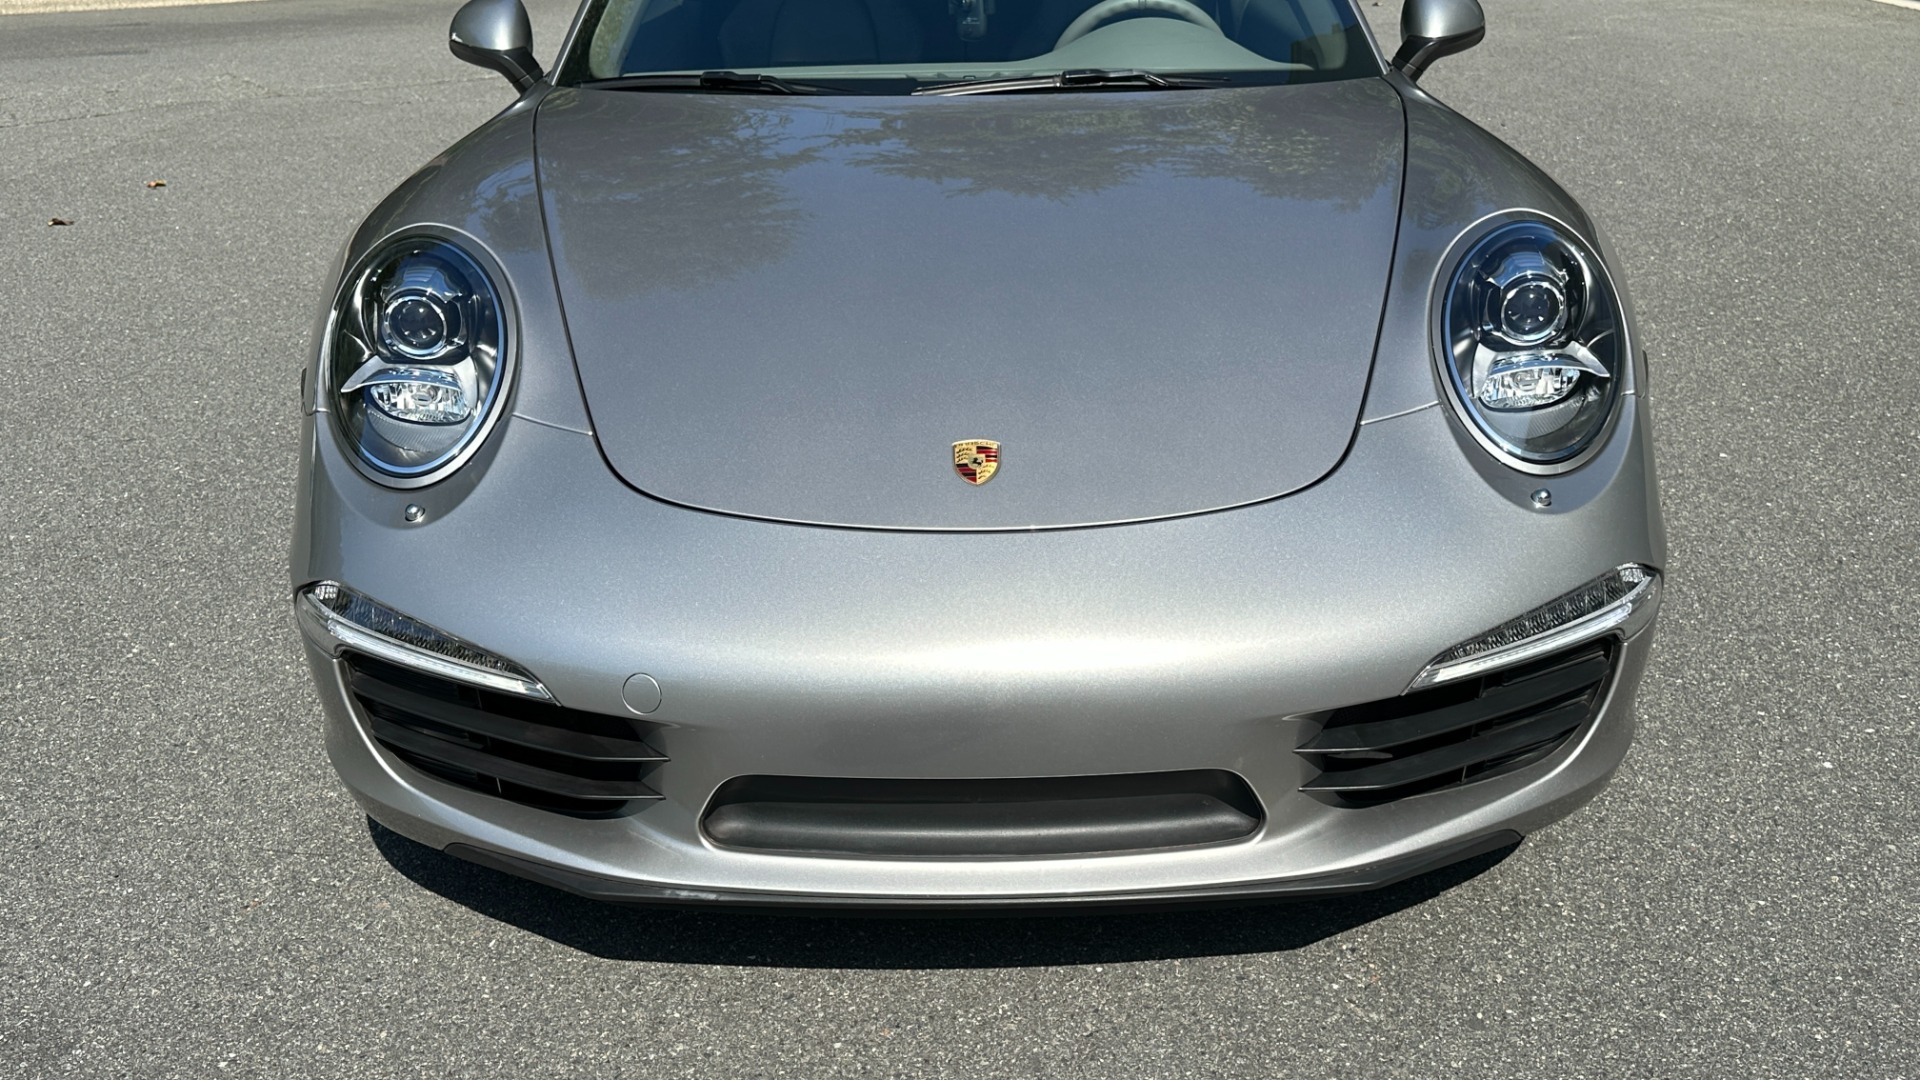 Used 2012 Porsche 911 991 CARRERA / PREMIUM PKG PLUS / SPORT EXHAUST / SPORT SEATS for sale Sold at Formula Imports in Charlotte NC 28227 8